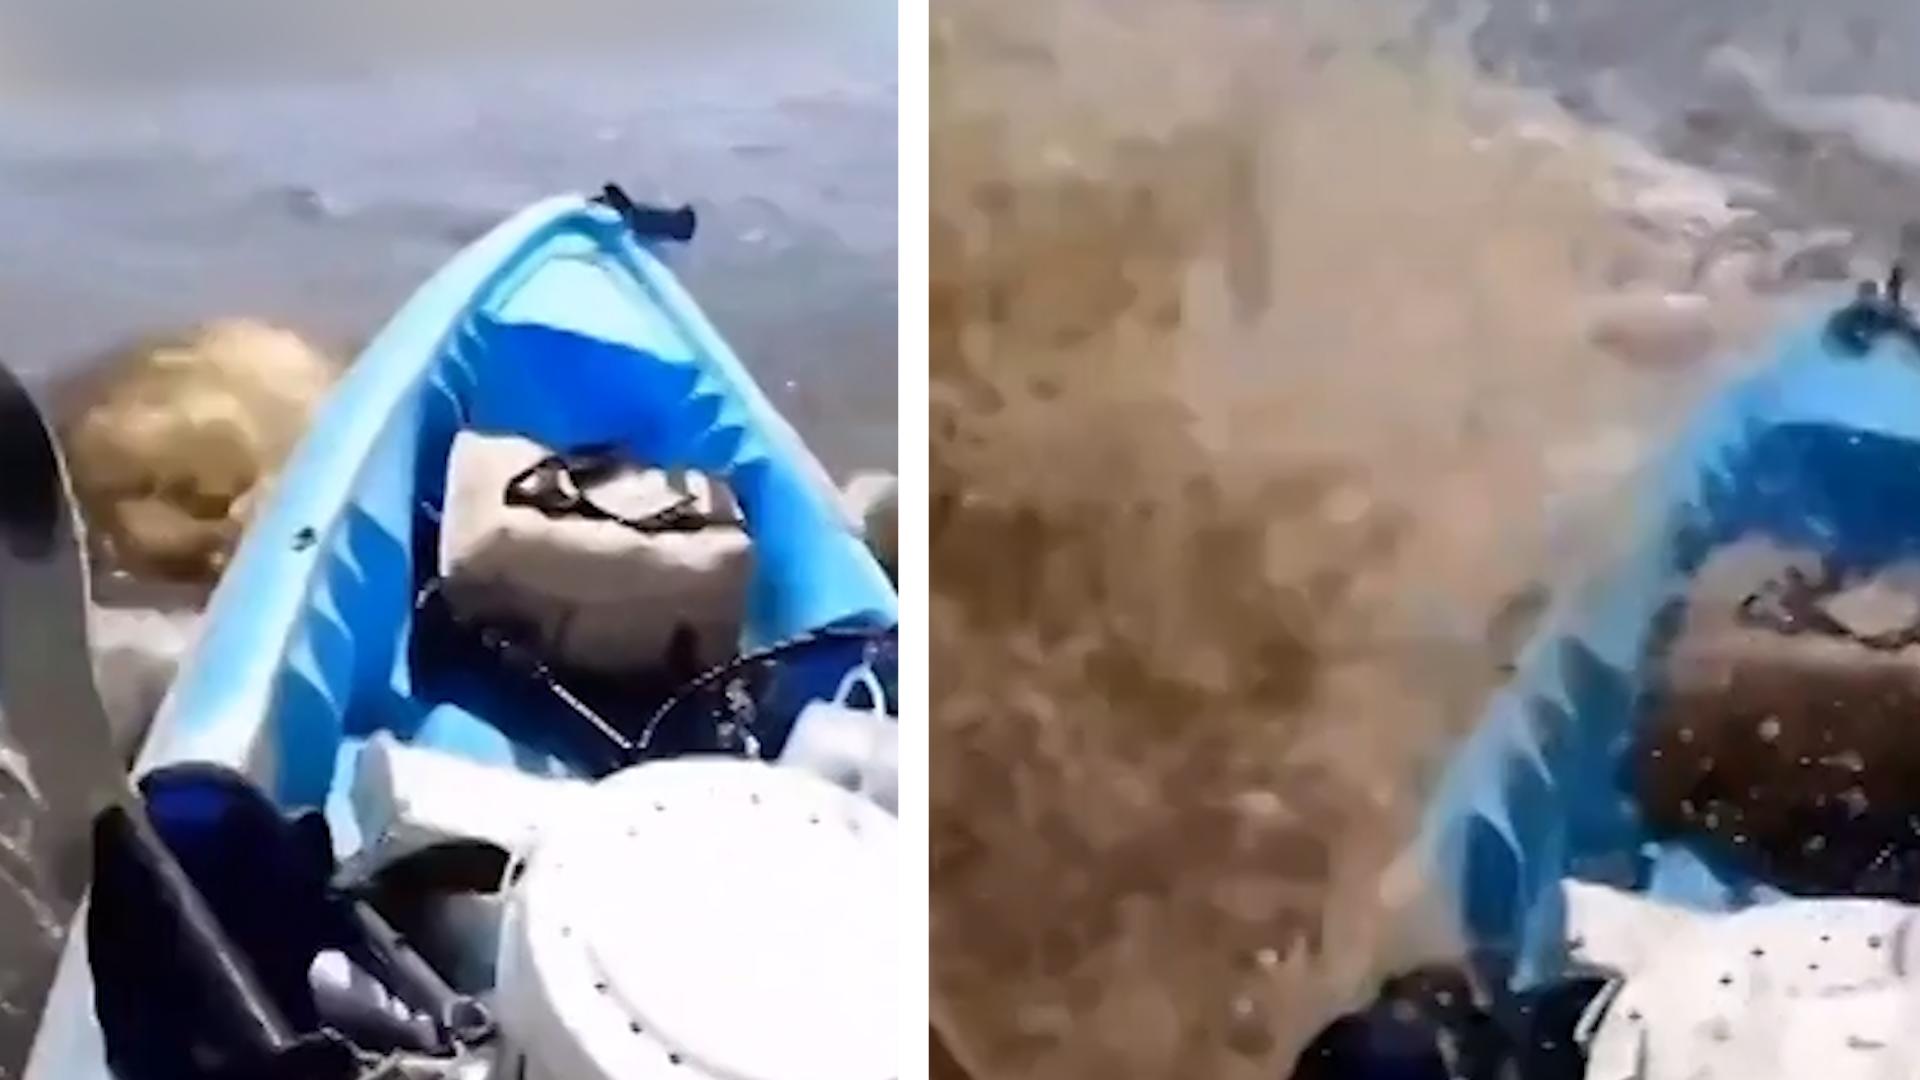 The kayaker experiences a huge shock while paddling and is suddenly surrounded!